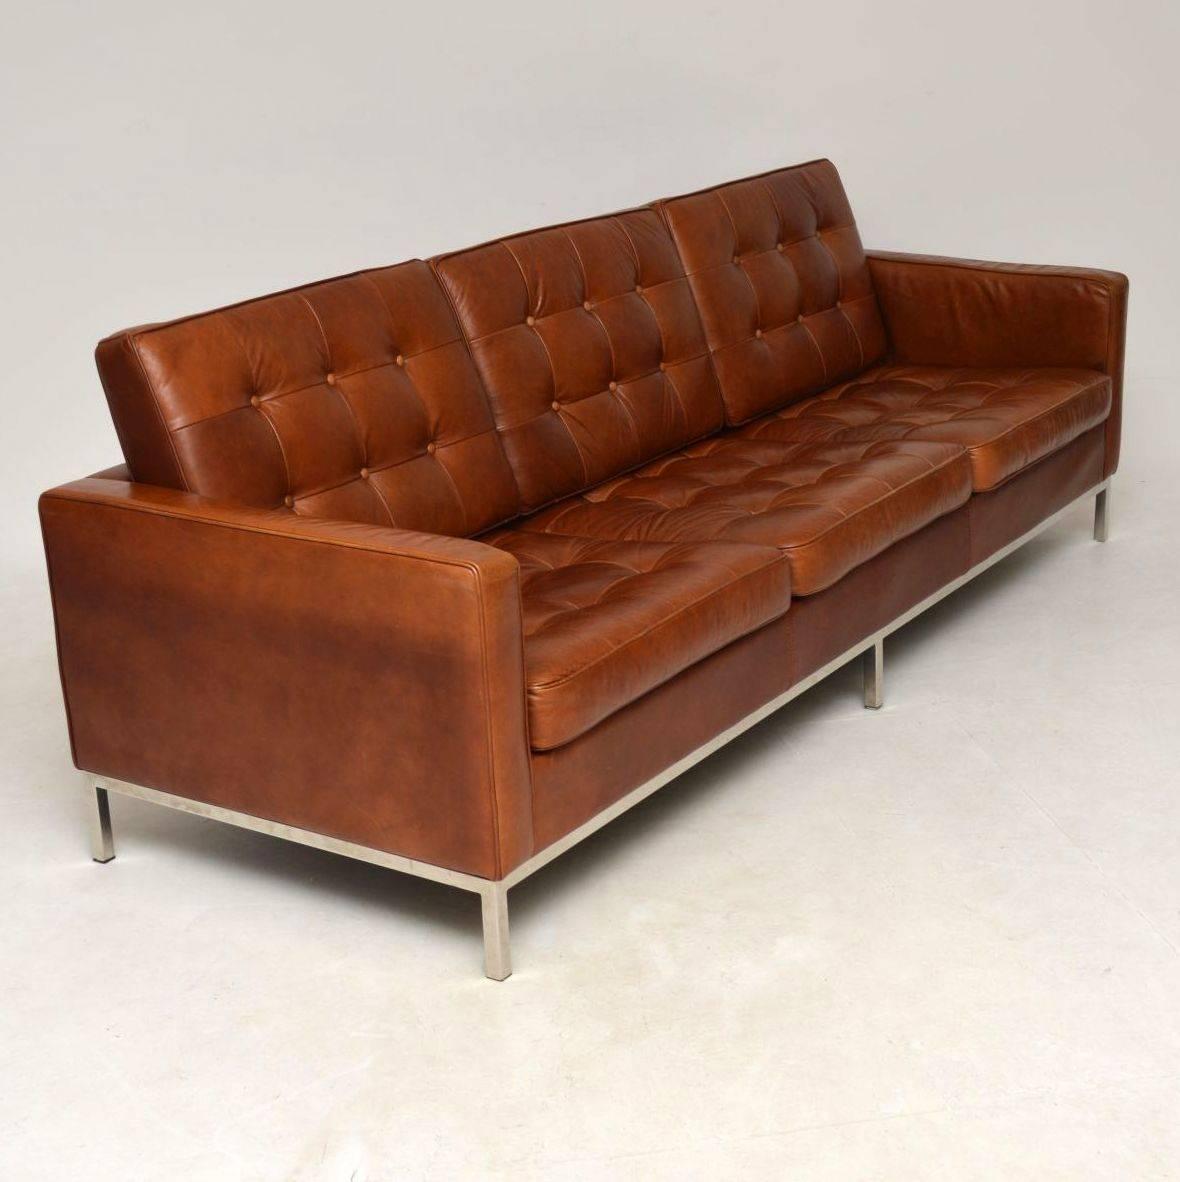 An absolutely superb sofa in leather and chrome, this was originally designed by Florence Knoll in the 1950s. This dates from the late 20th century and we’re not completely sure if this is a genuine Knoll original or Knoll inspired. Either way the